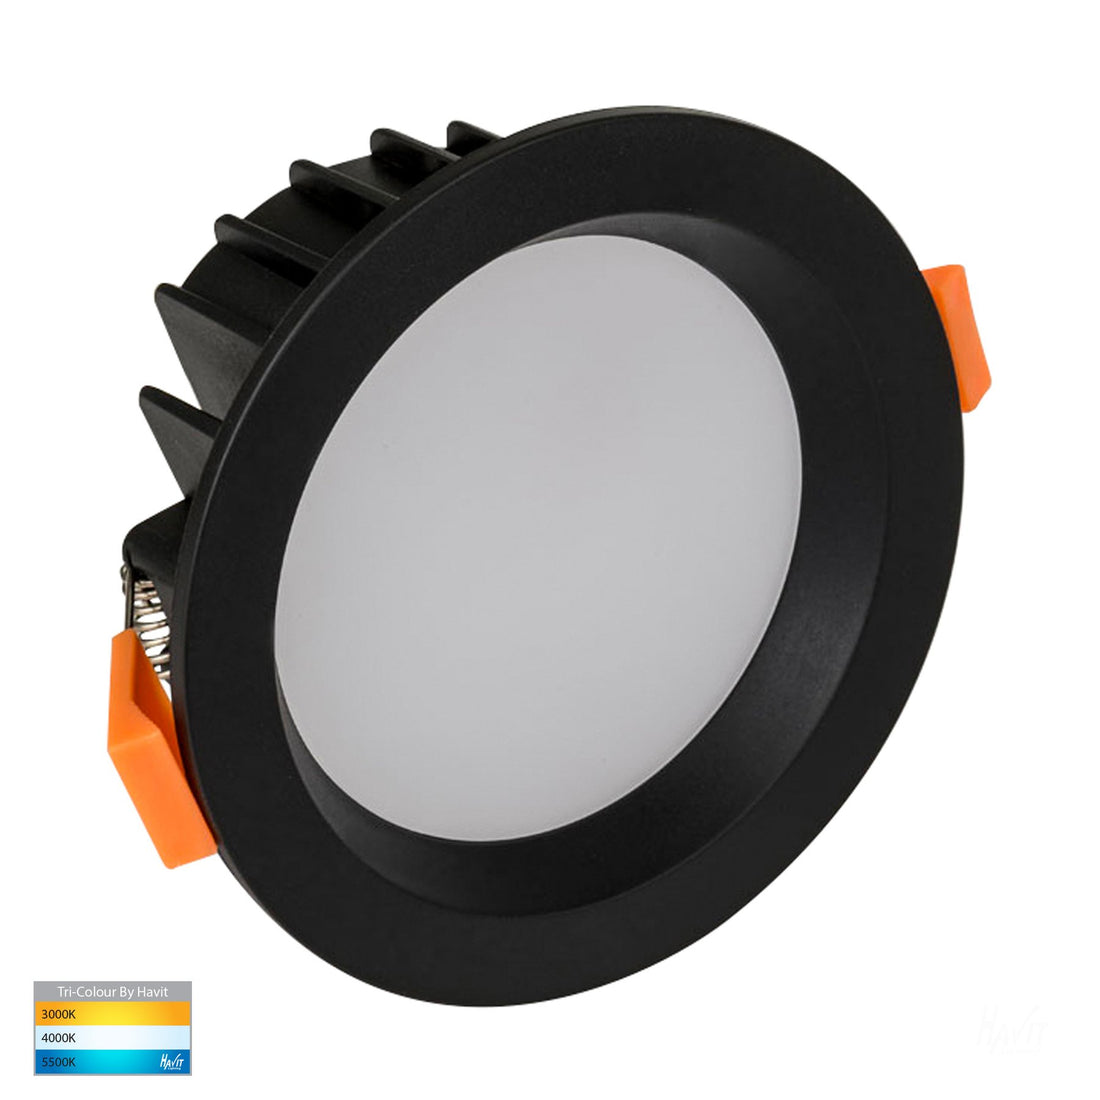 Polly 8w 90mm Recessed LED Downlight Black